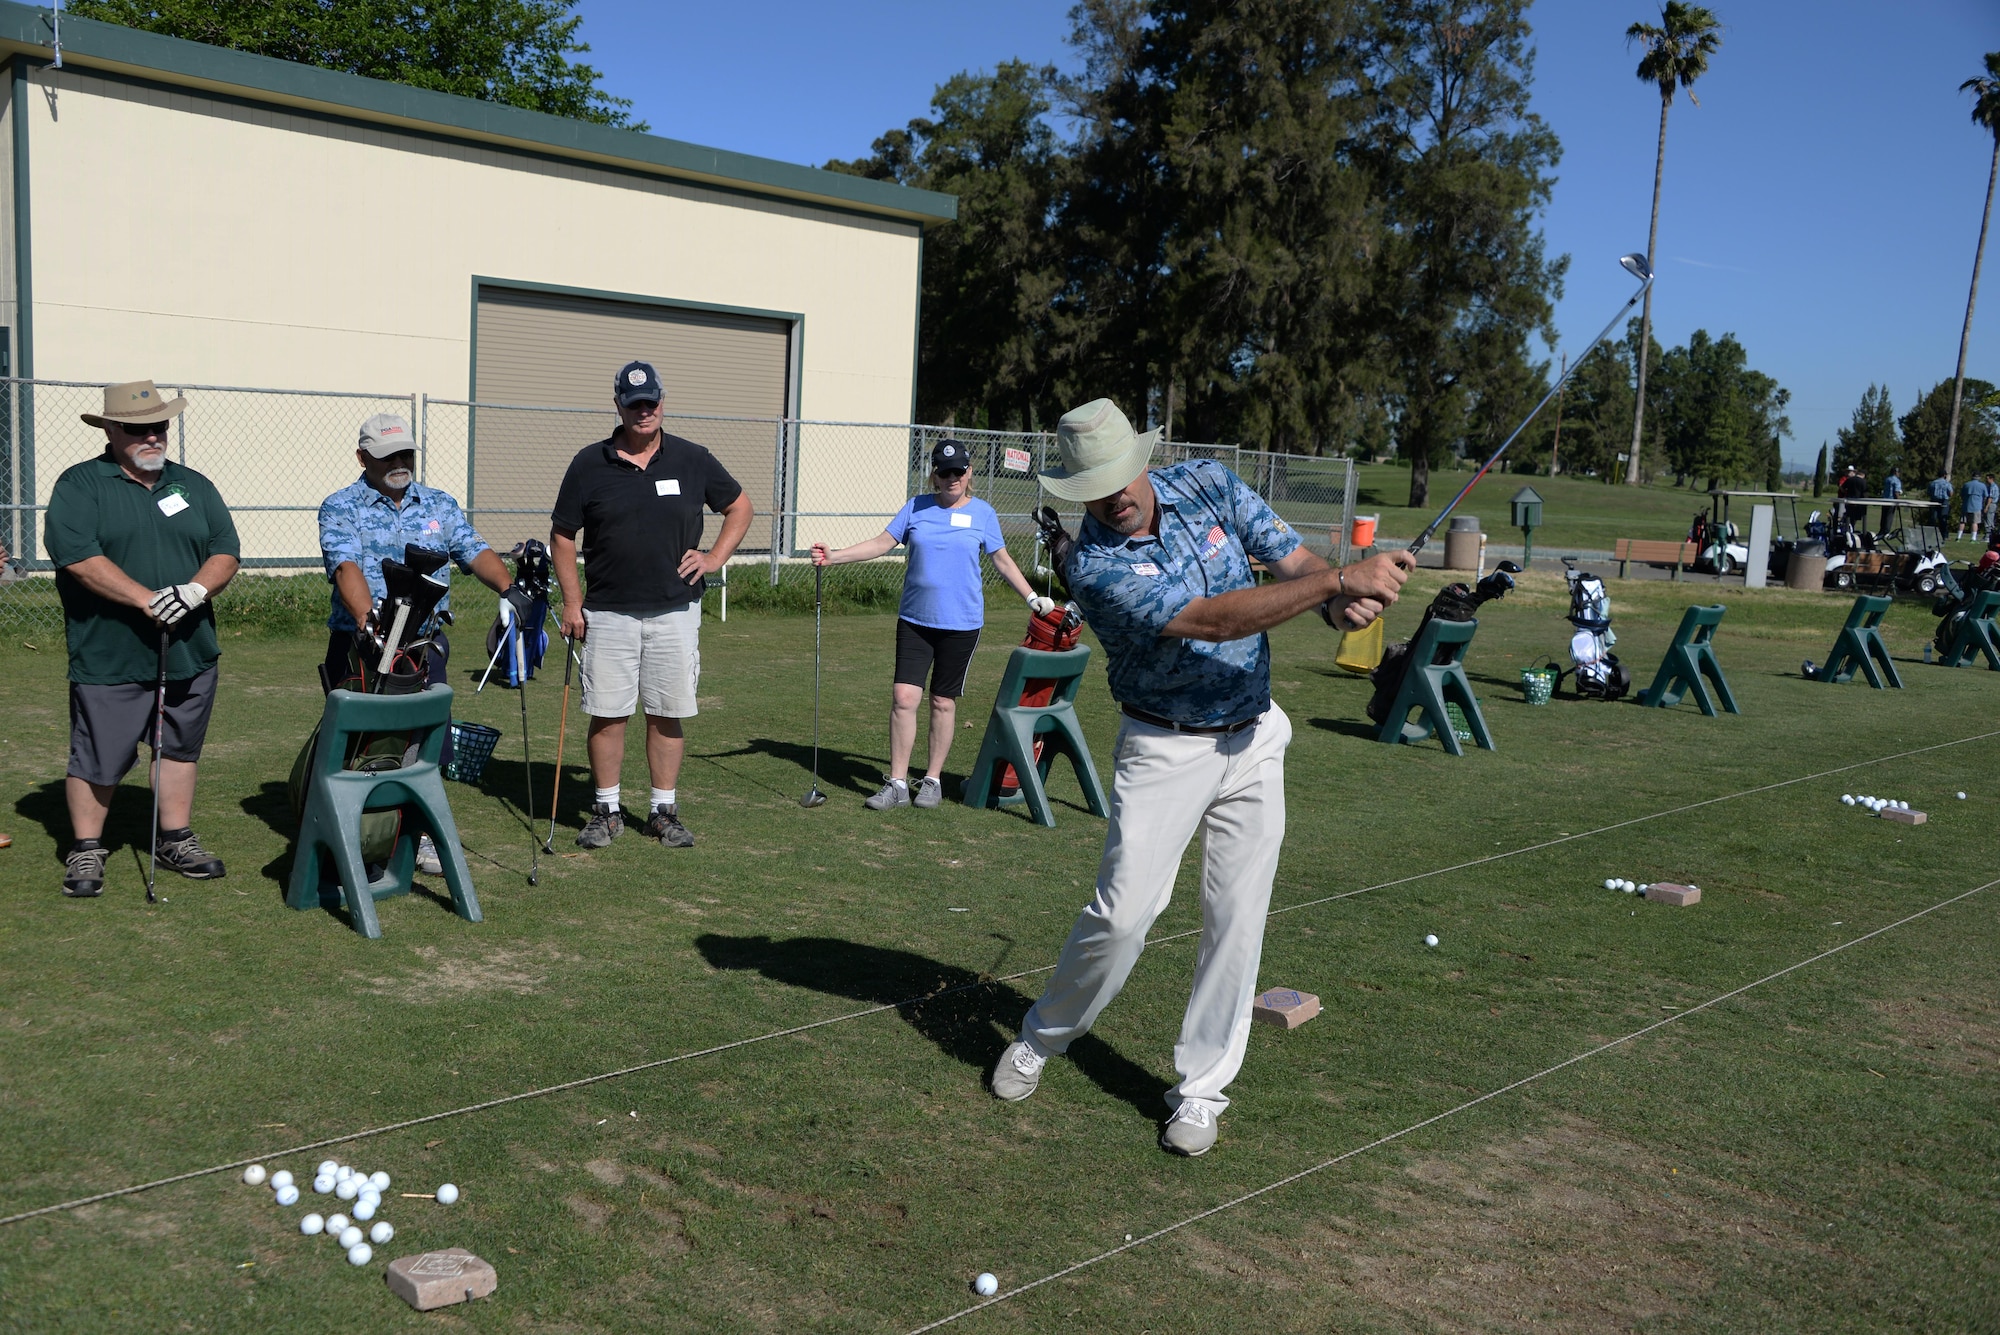 Jesse Walker, a Professional Golfers Association instructor, demonstrates proper swing techniques during the PGA's Helping Our Patriots Everywhere event May 5 at the Cypress Lakes Golf Course in Vacaville, Calif. Dozens of veterans attended the event designed to teach golf skills and bring prior service members together. (U.S. Air Force photo/Tech. Sgt. James Hodgman/Released)